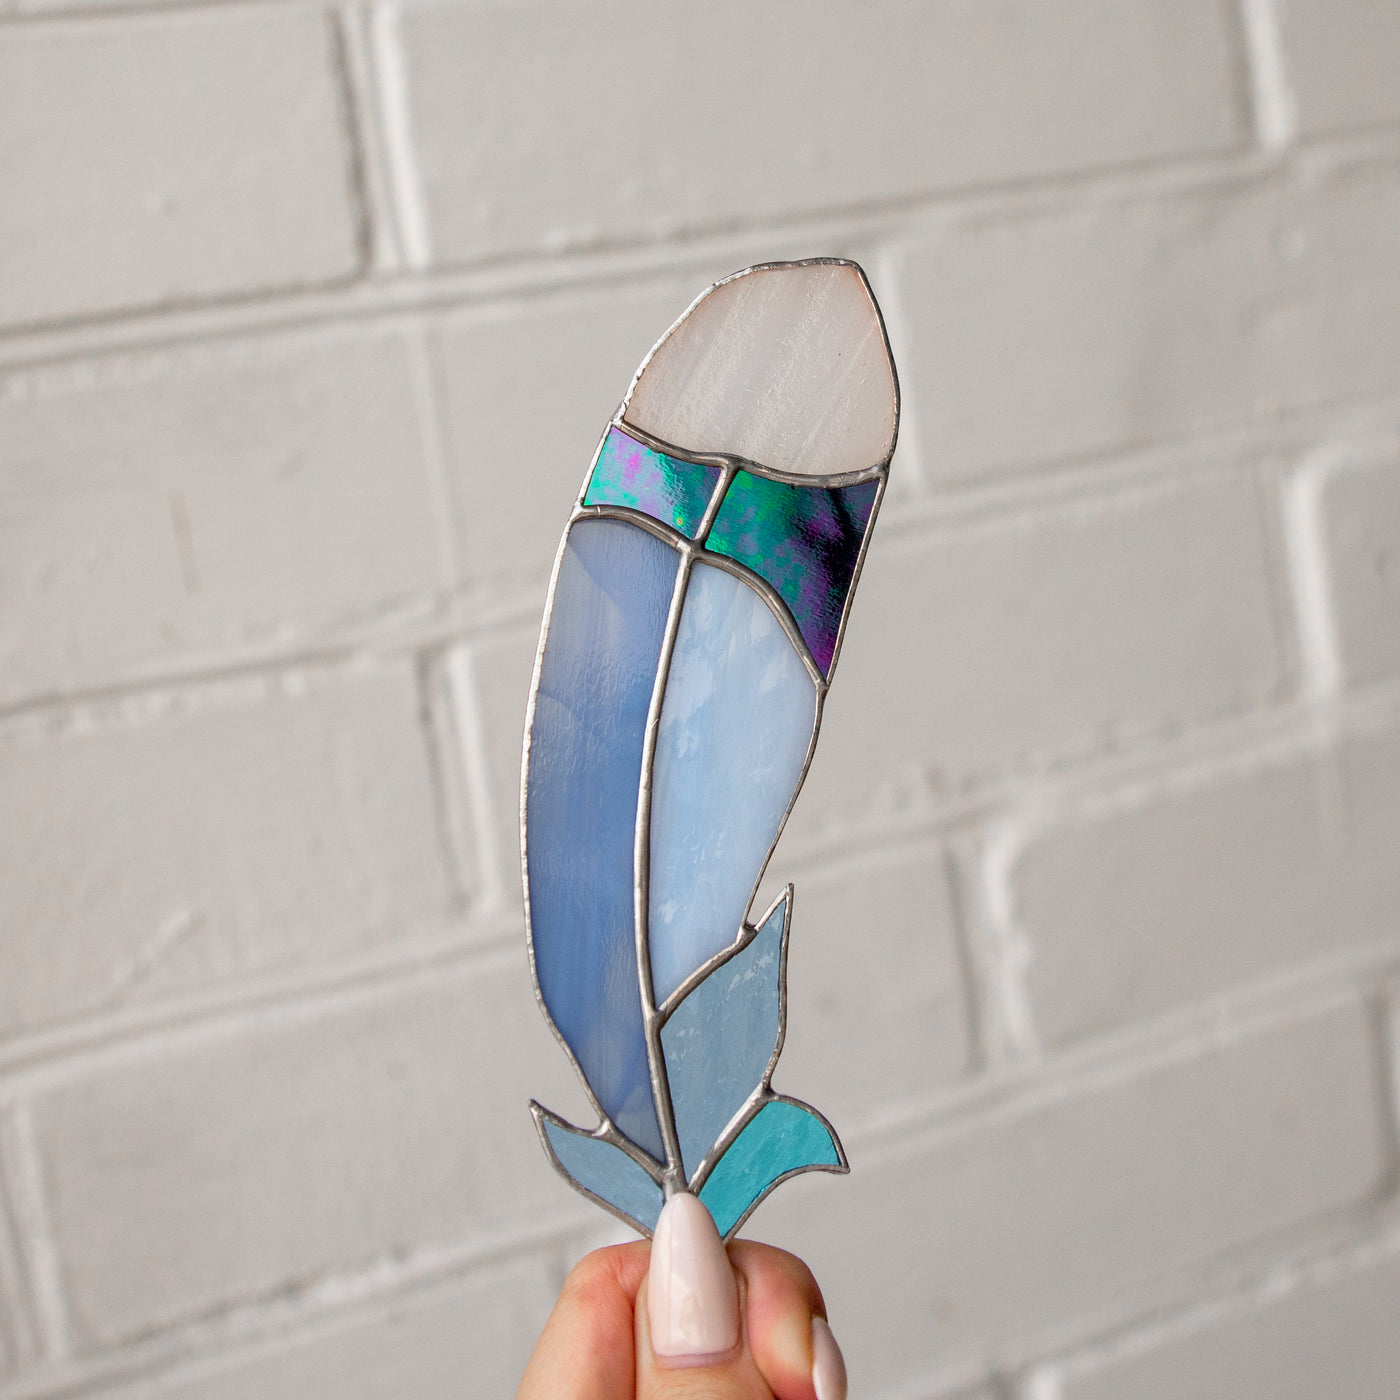 Bluejay feather suncatcher of stained glass